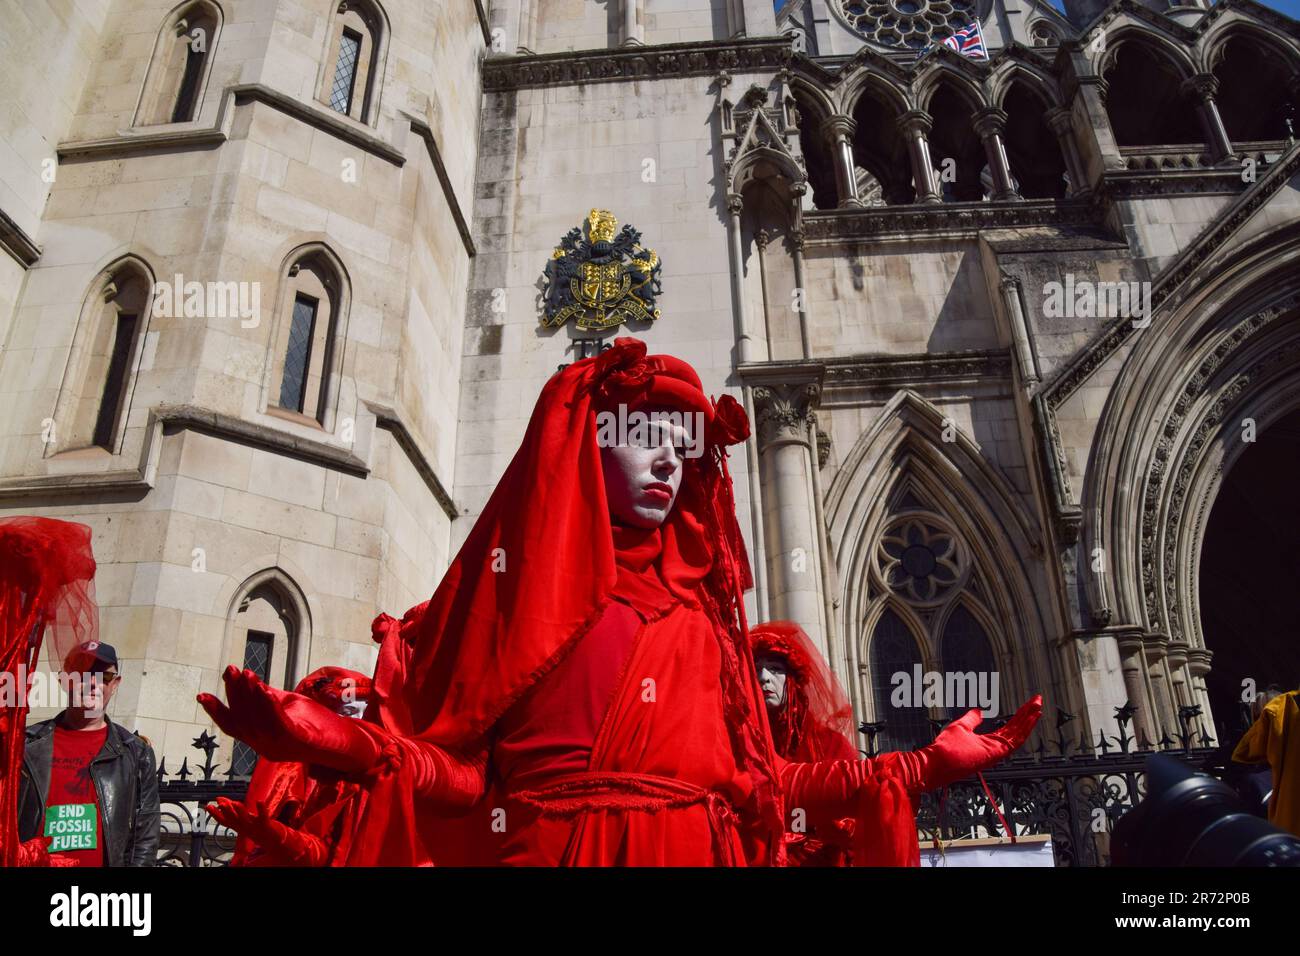 London, UK. 8th June 2023. Climate protesters, including Extinction Rebellion’s Red Rebels, gathered outside the Royal Courts of Justice during the judicial review of the planning permission for UK Oil & Gas to explore for fossil fuels near the village of Dunsfold. Stock Photo